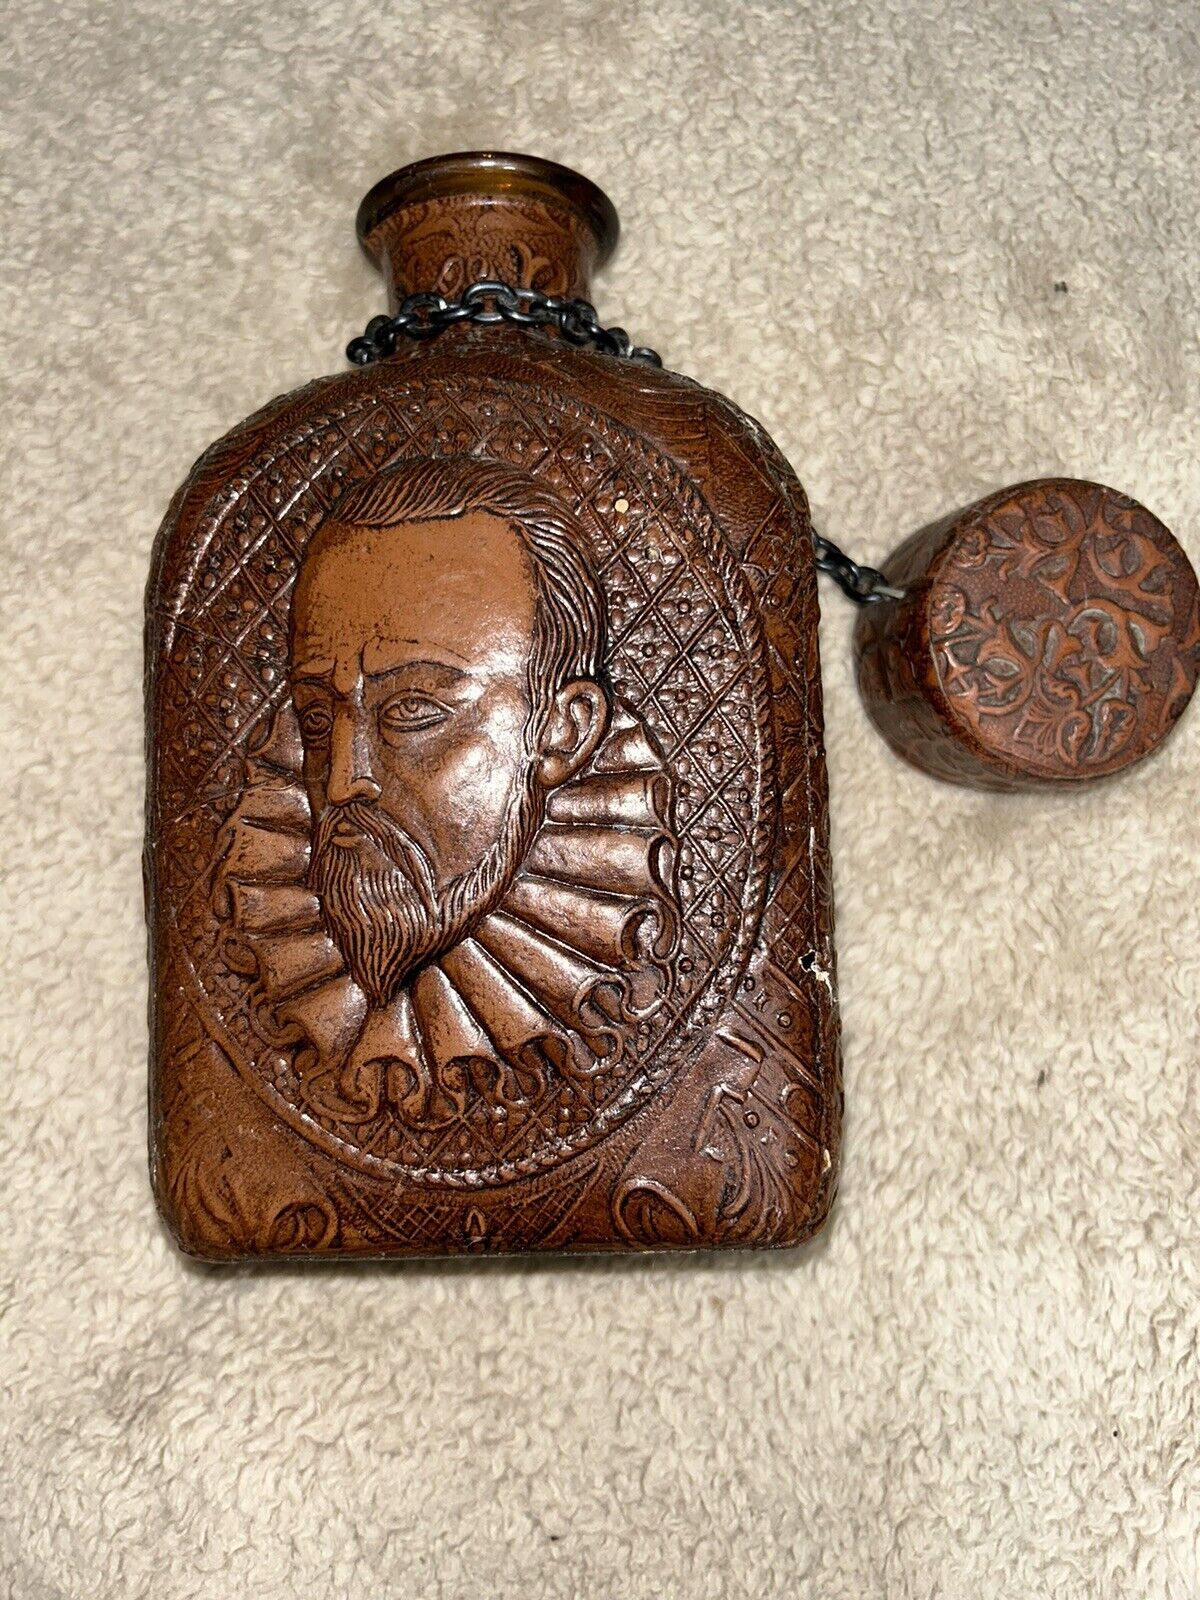 Embossed Leather Wrapped Bottle Decanter Spanish Don Quixote - Display Vintage